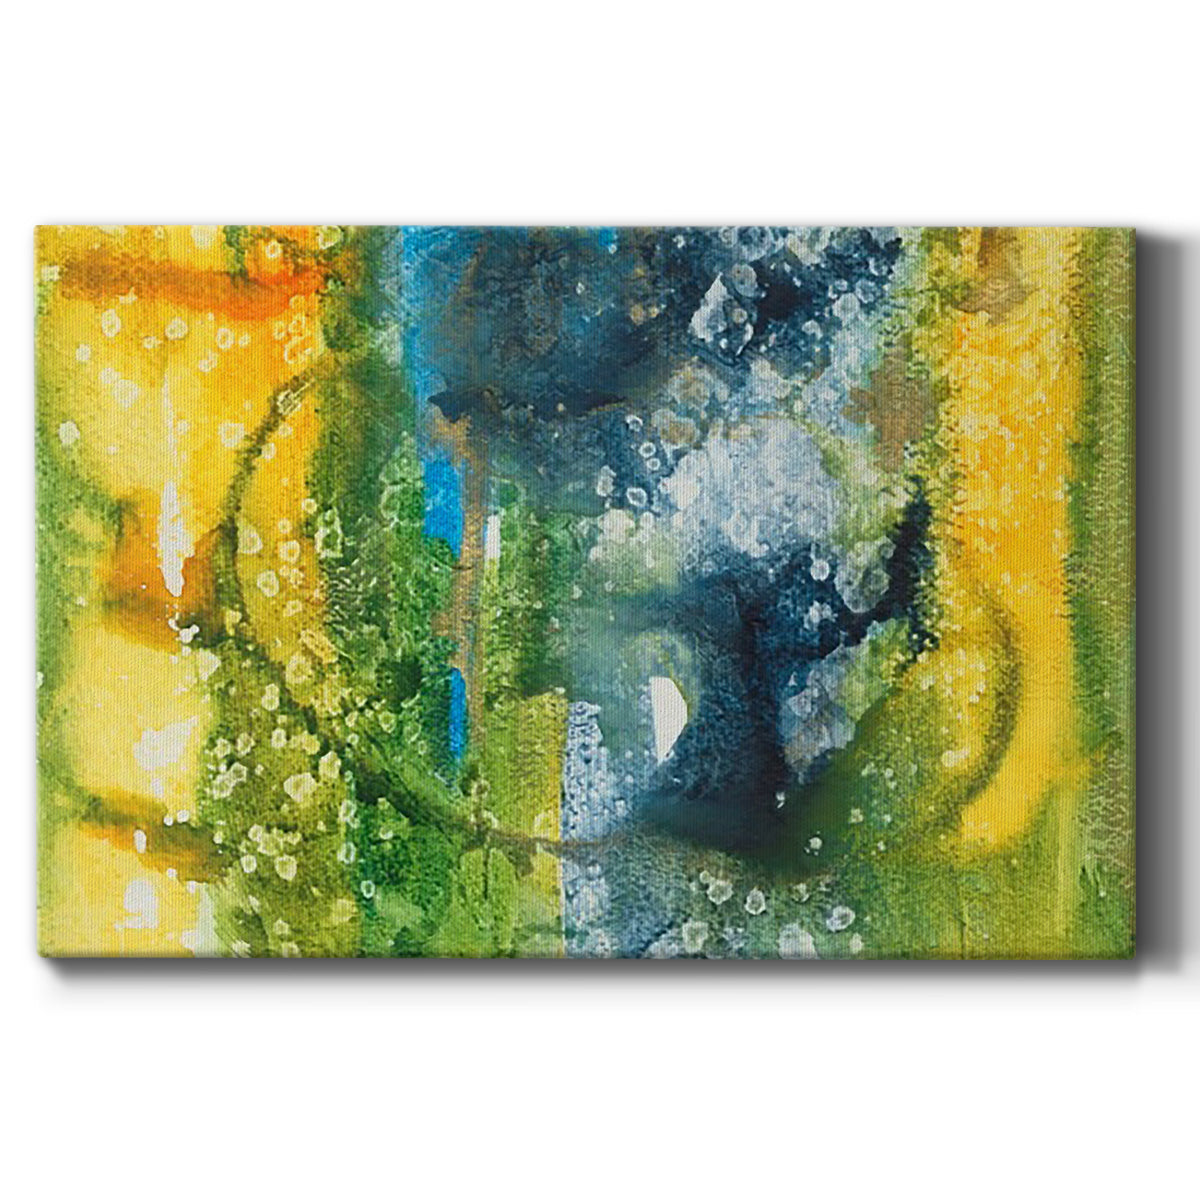 Aquatic Energy III Premium Gallery Wrapped Canvas - Ready to Hang